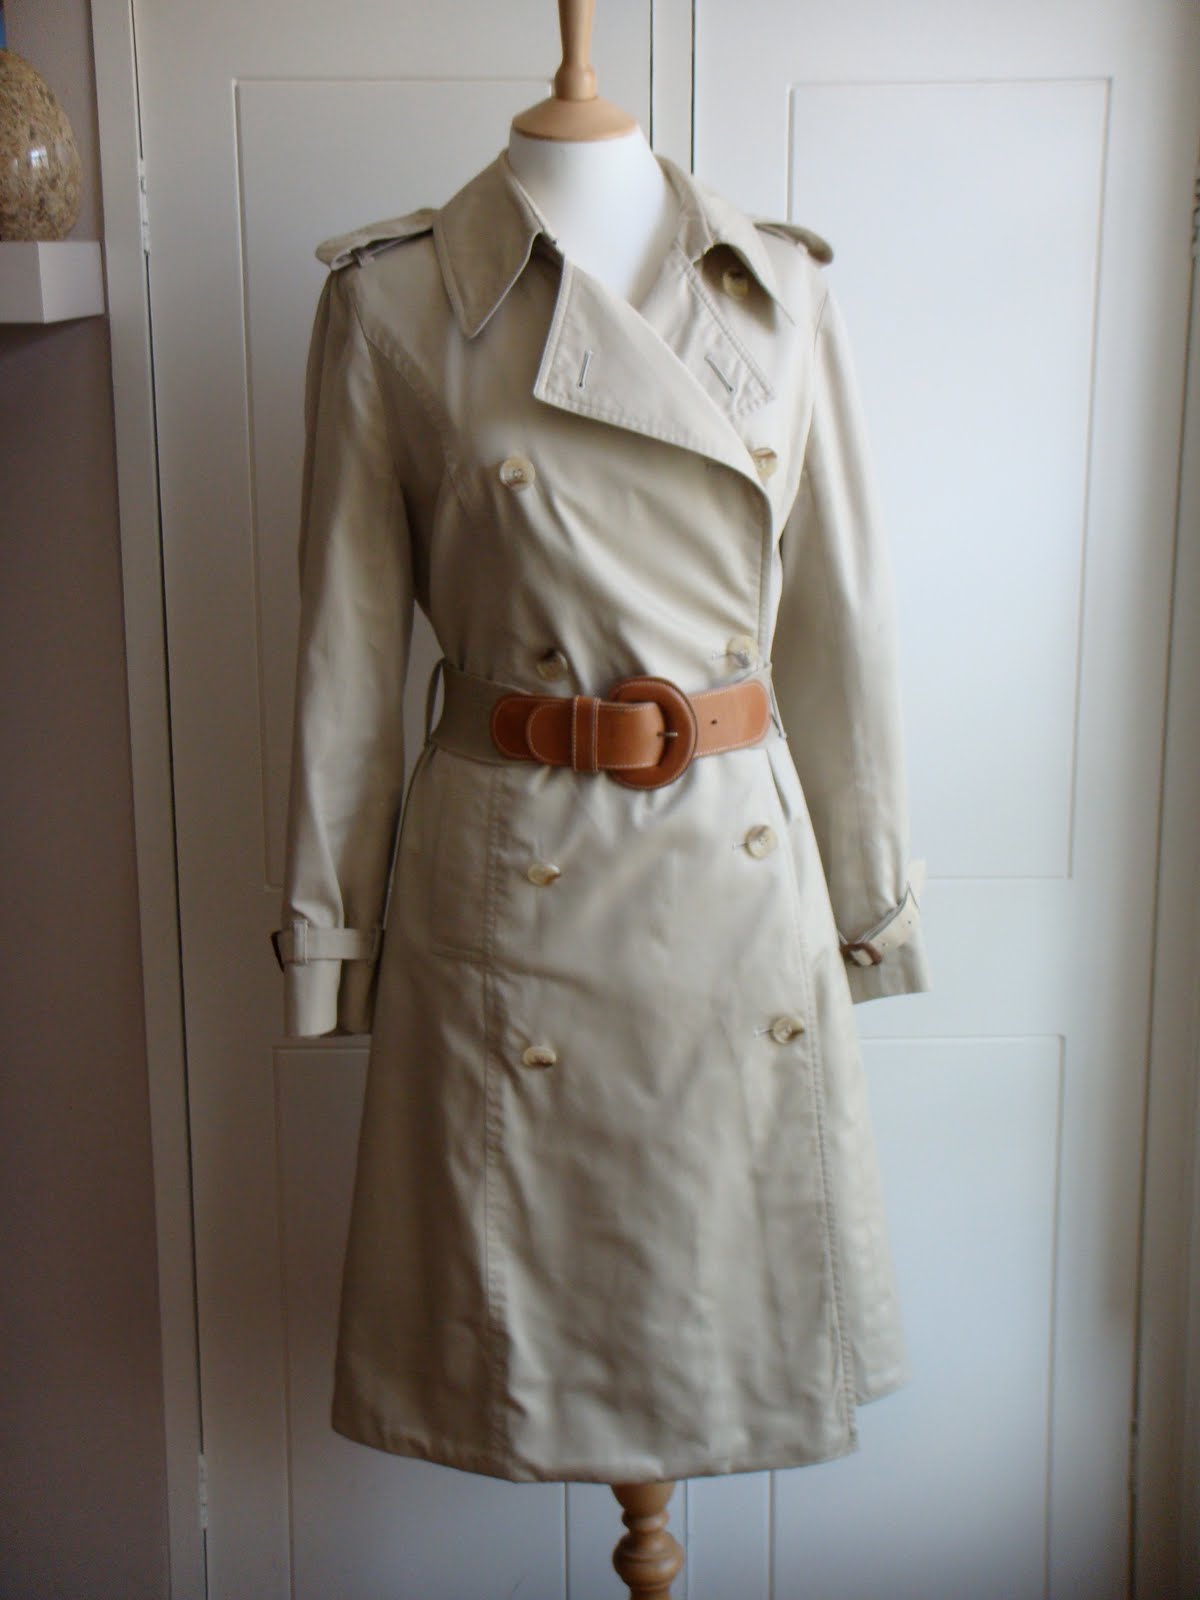 Burberry Trench Coat Belt Shop, SAVE 53% 